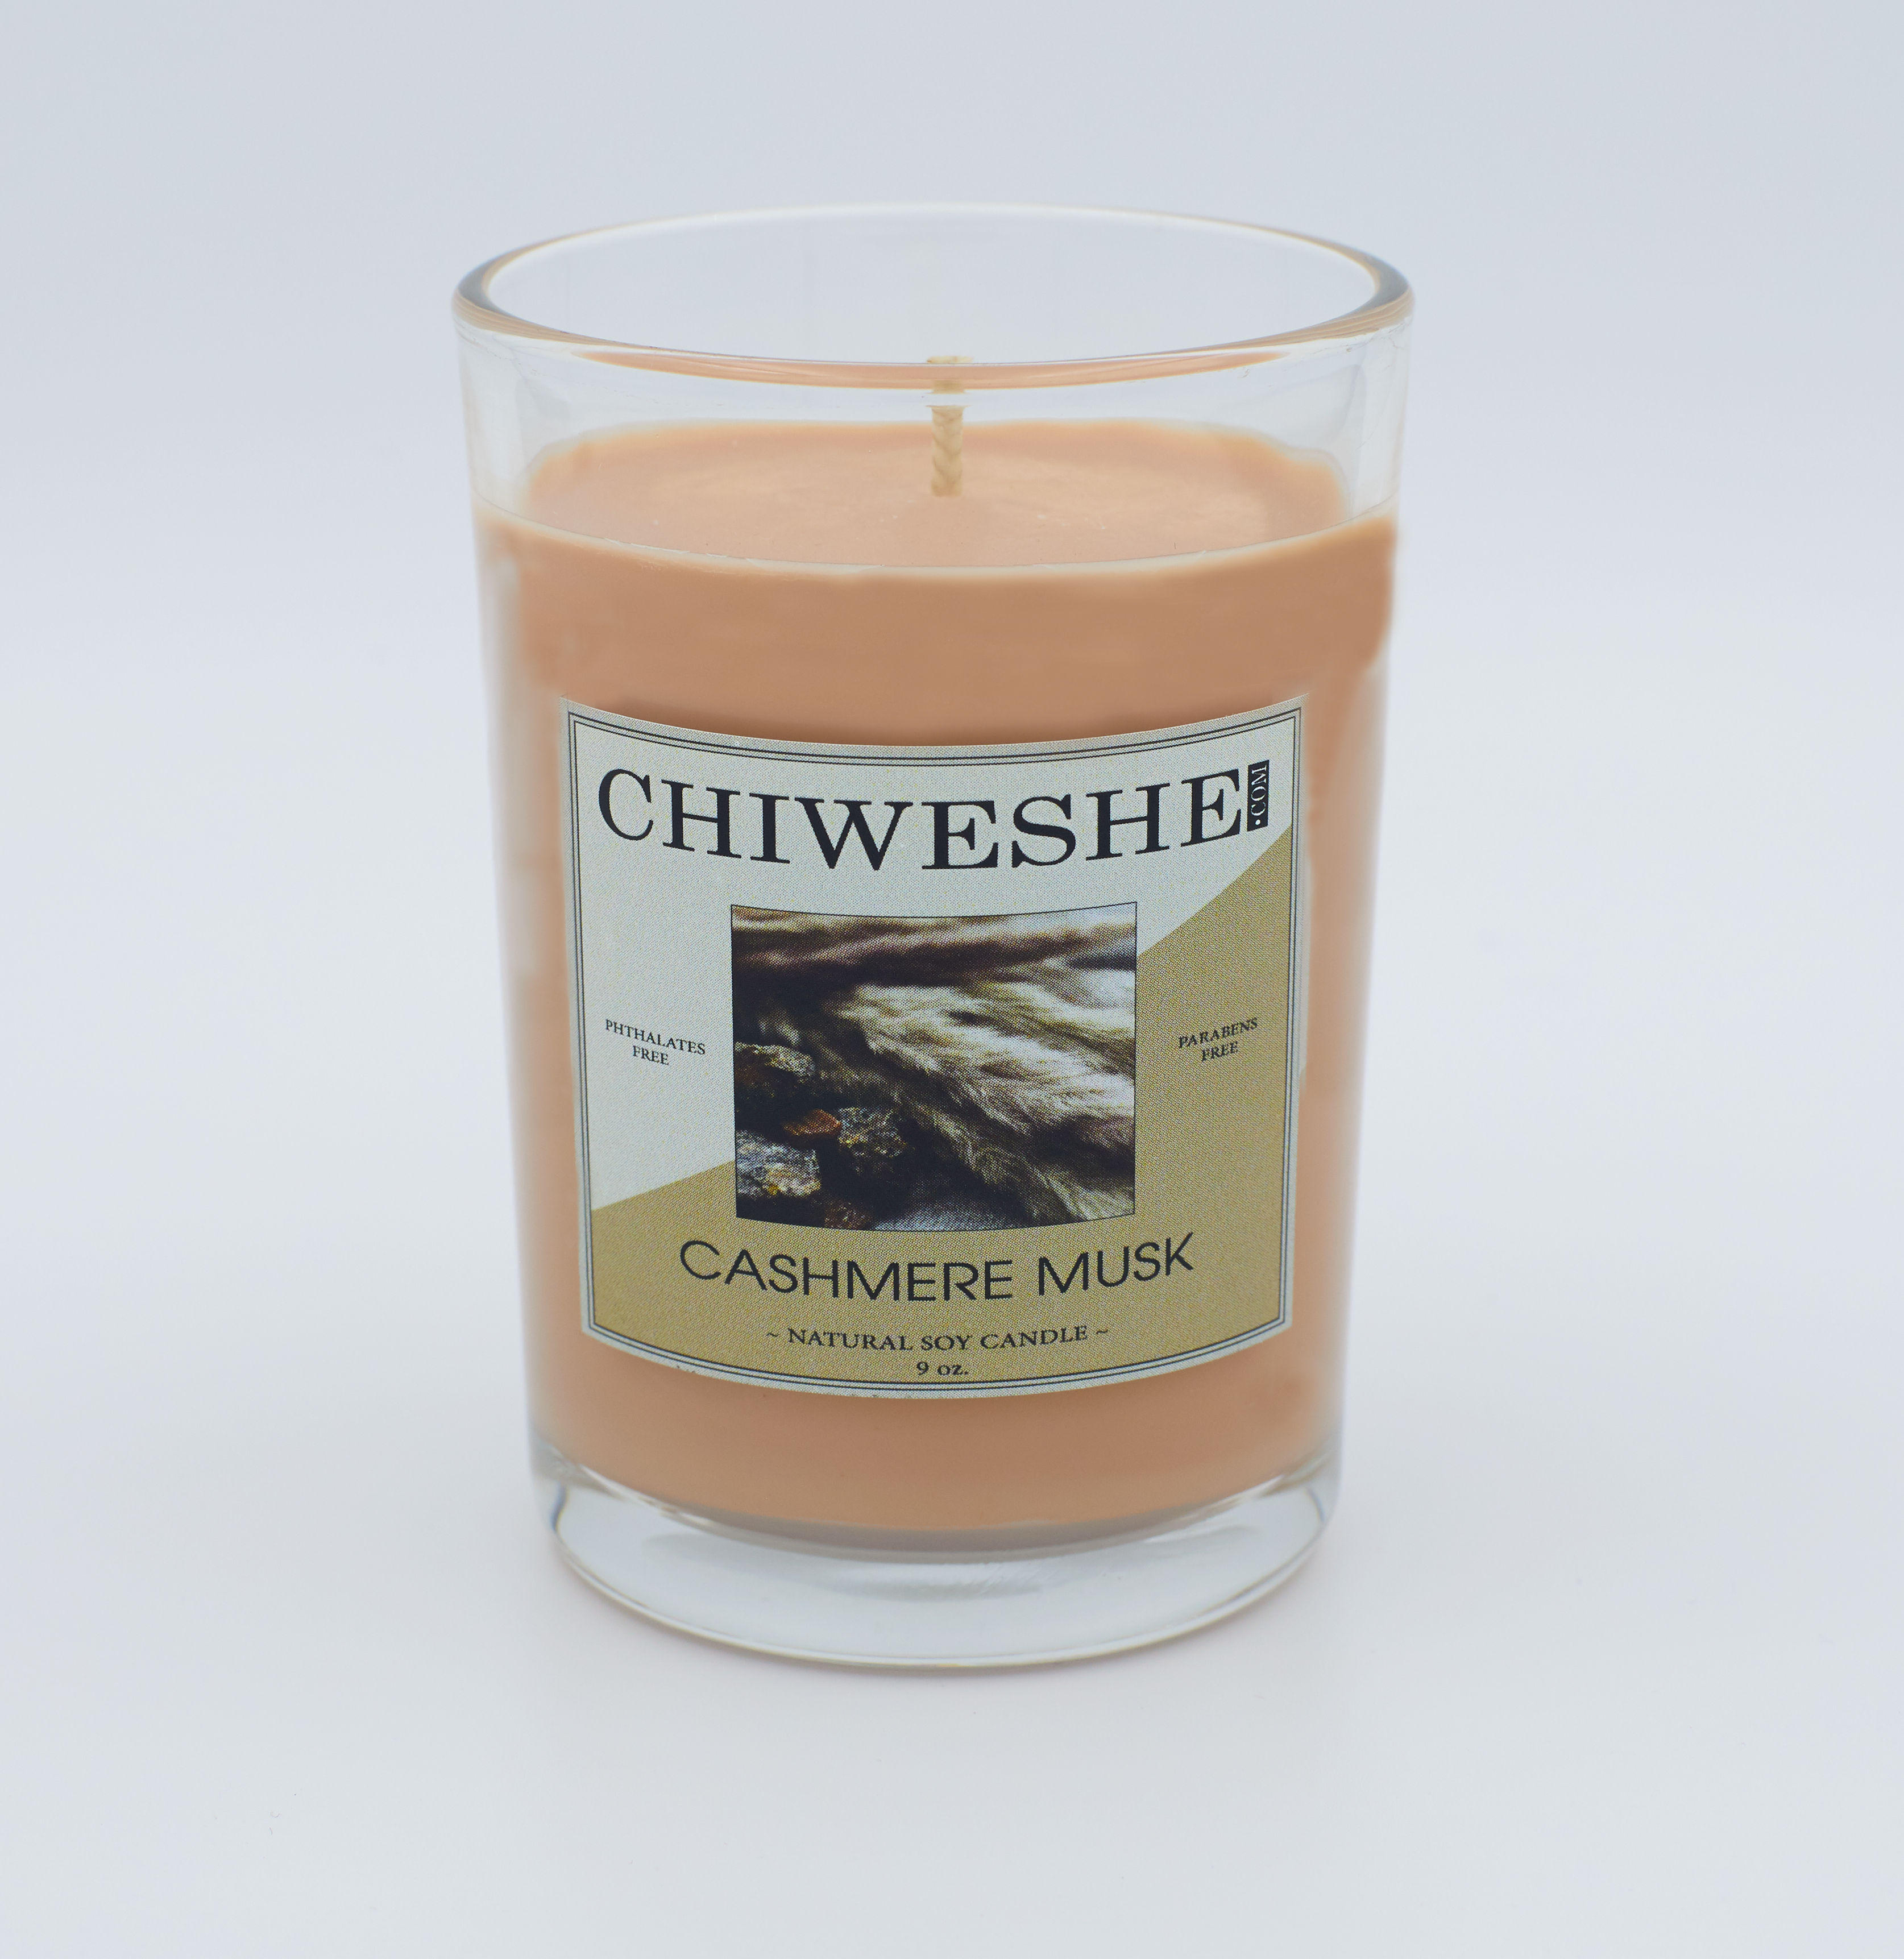 Cashmere Musk Natural Soy Candle The Puebla Collection (9 oz.)